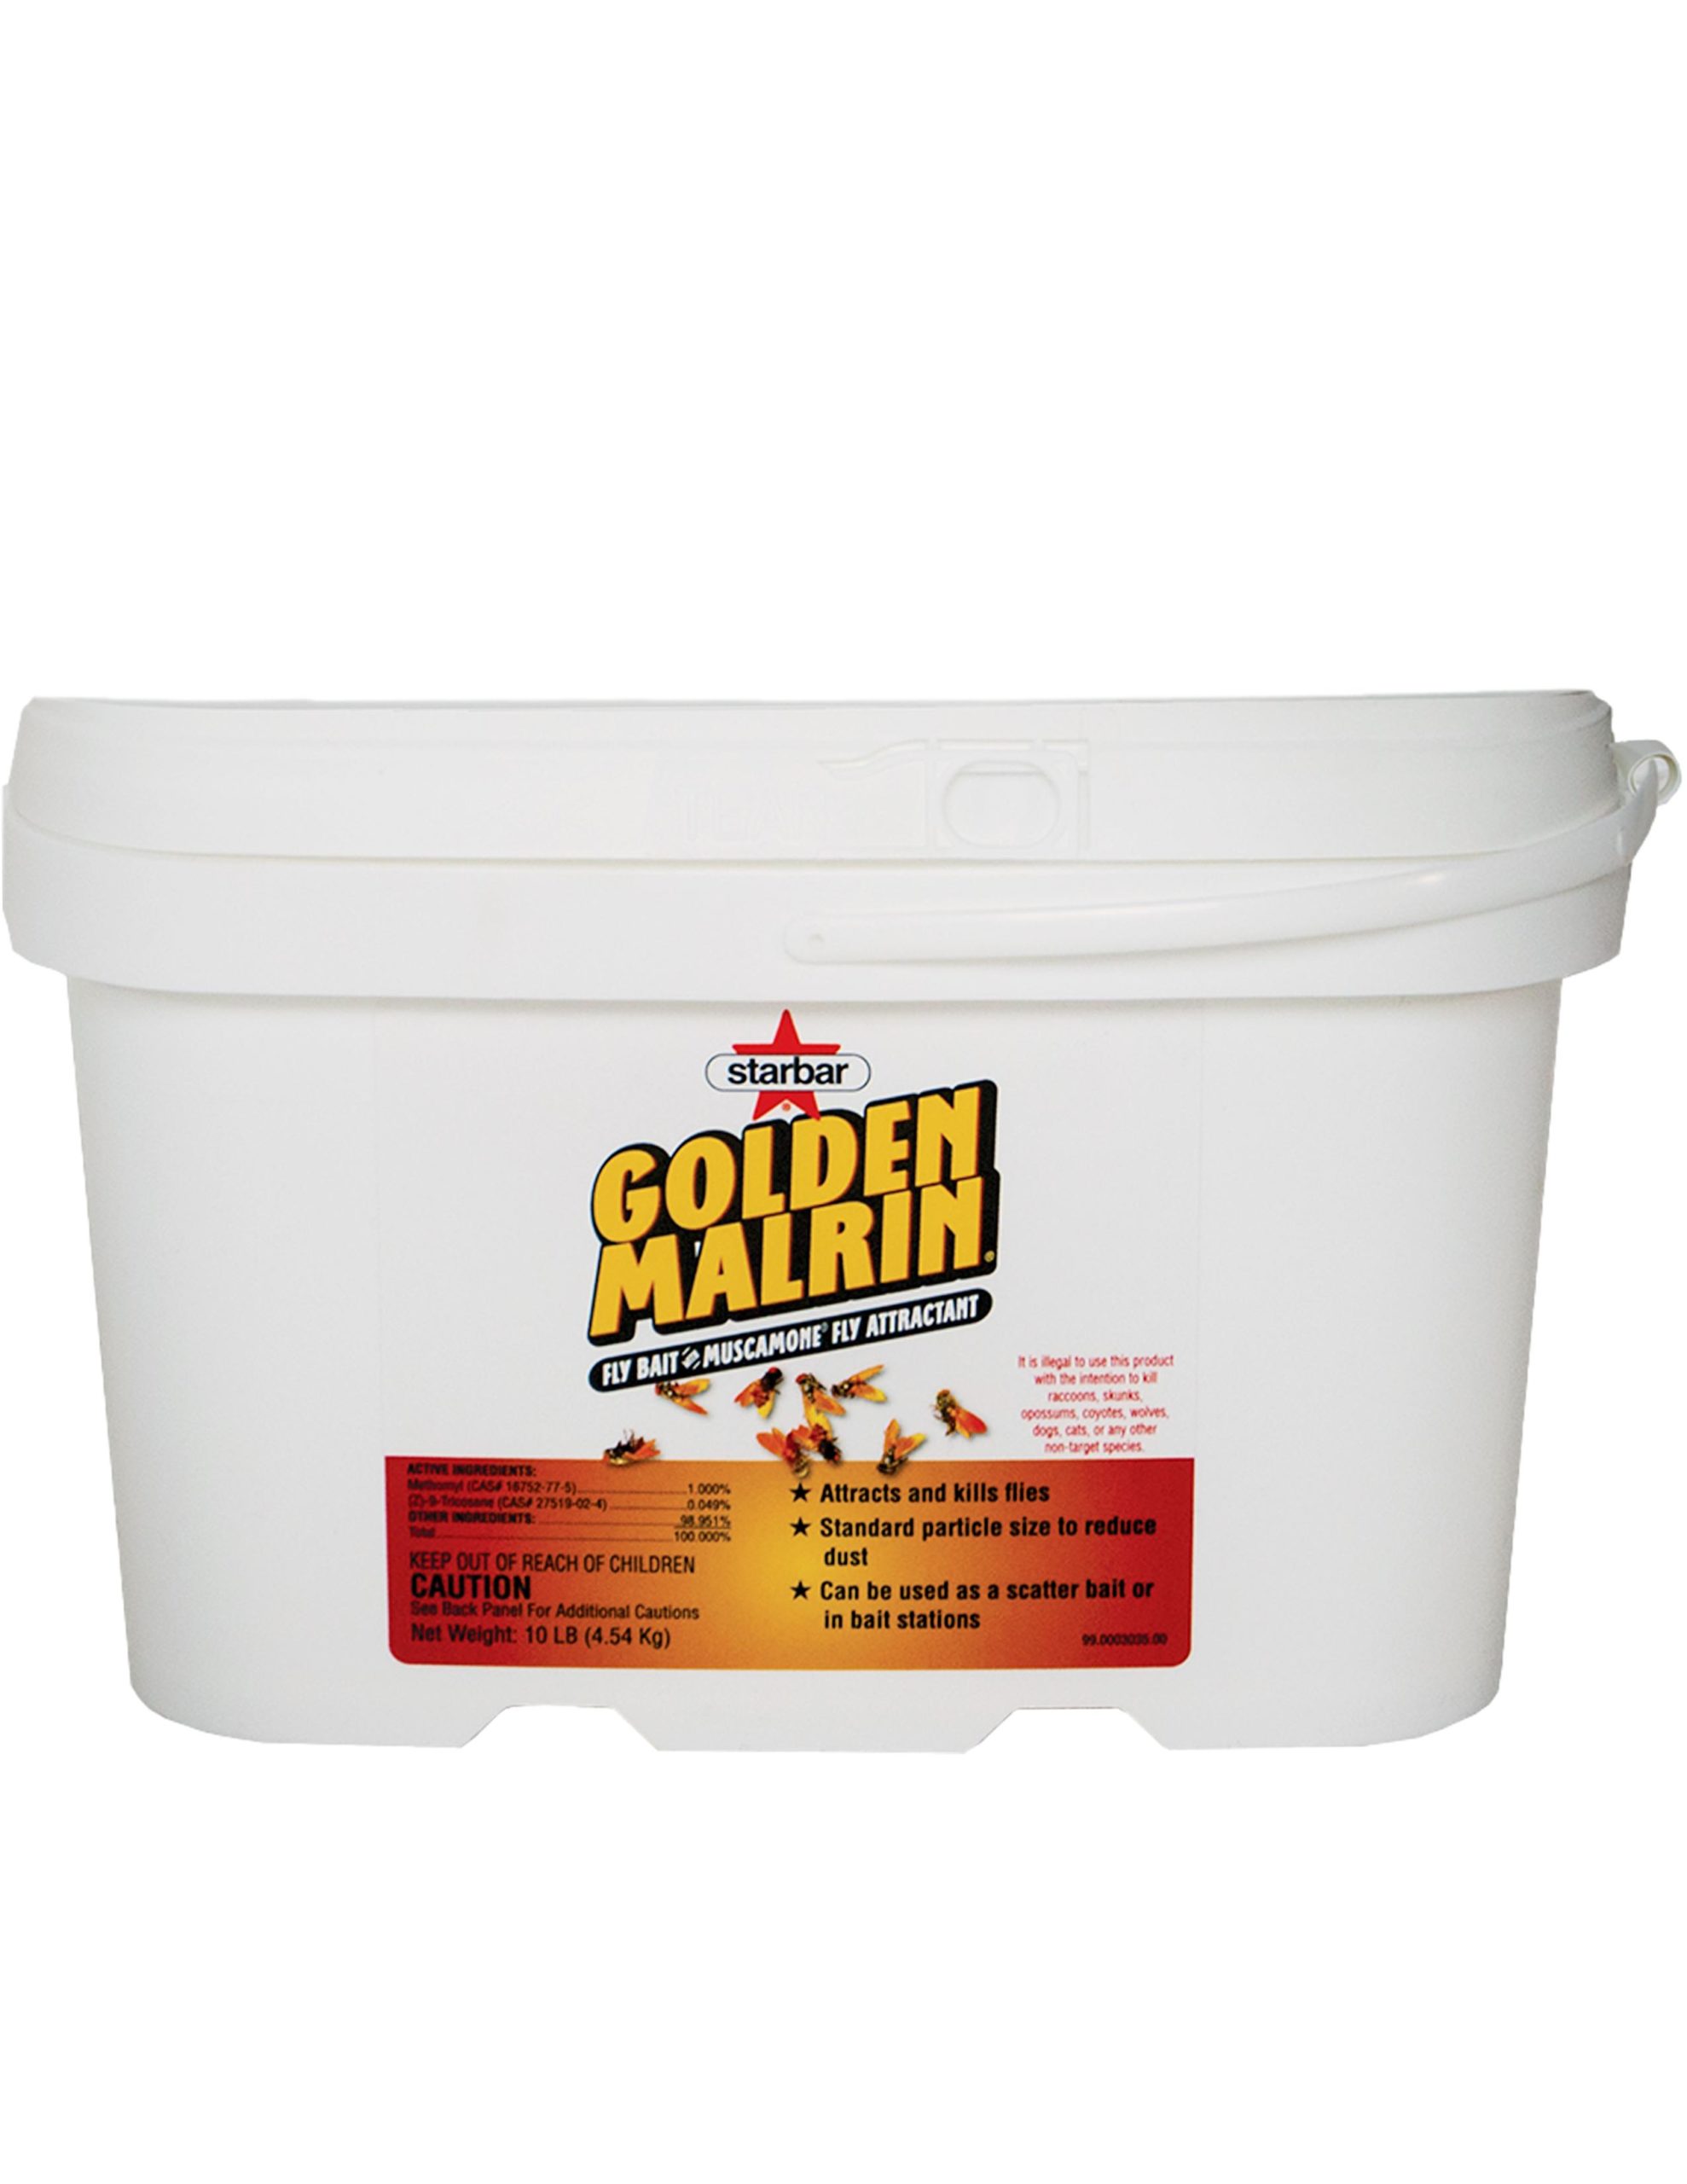 Golden Malrin Fly Bait OBCO Chemical Corporation Janitorial and